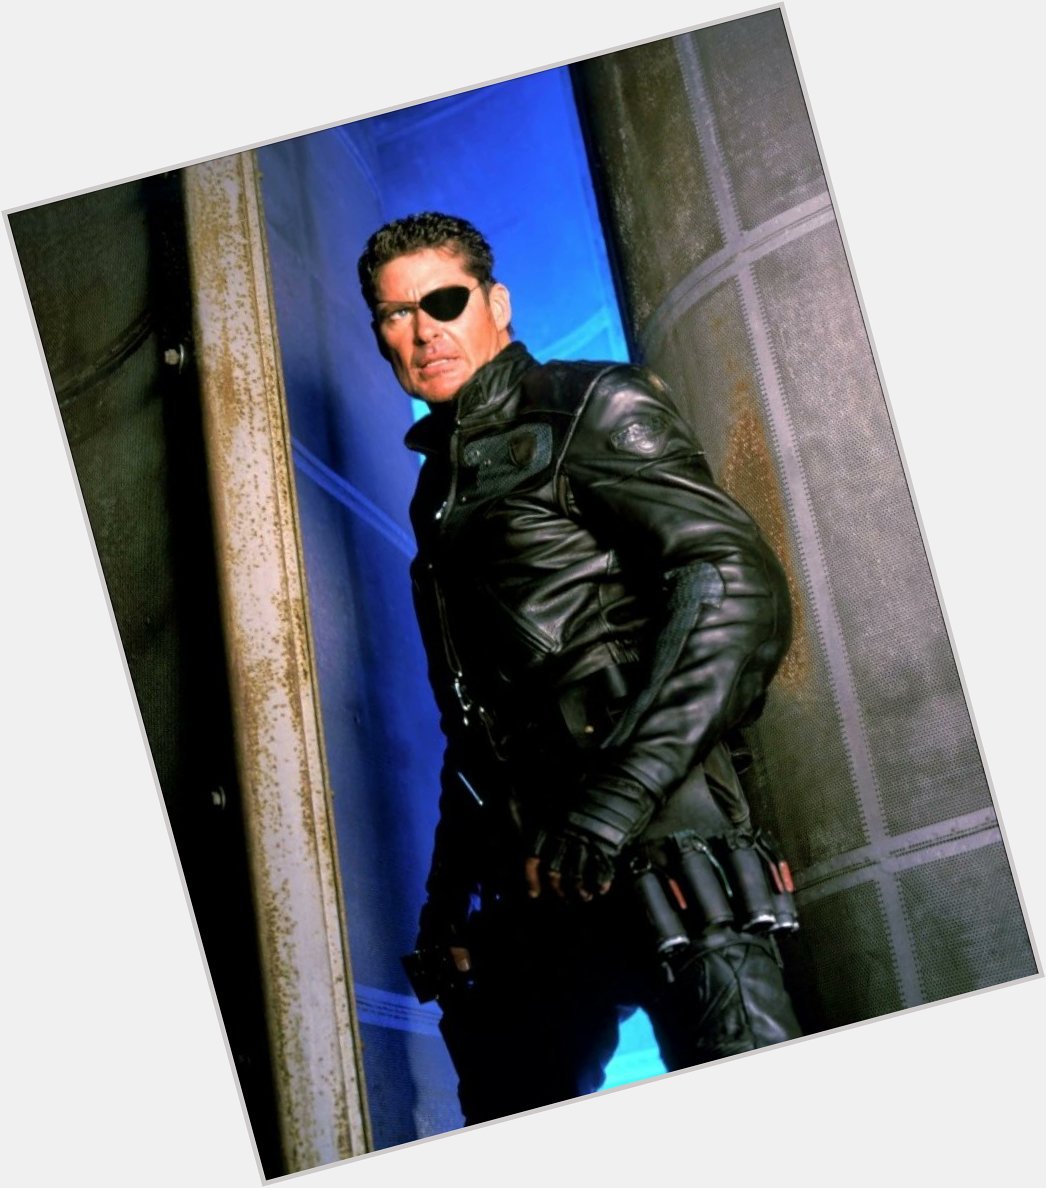 Happy 70th birthday to David Hasselhoff, star of the 1998 TV movie \Nick Fury: Agent of S.H.I.E.L.D.\ 